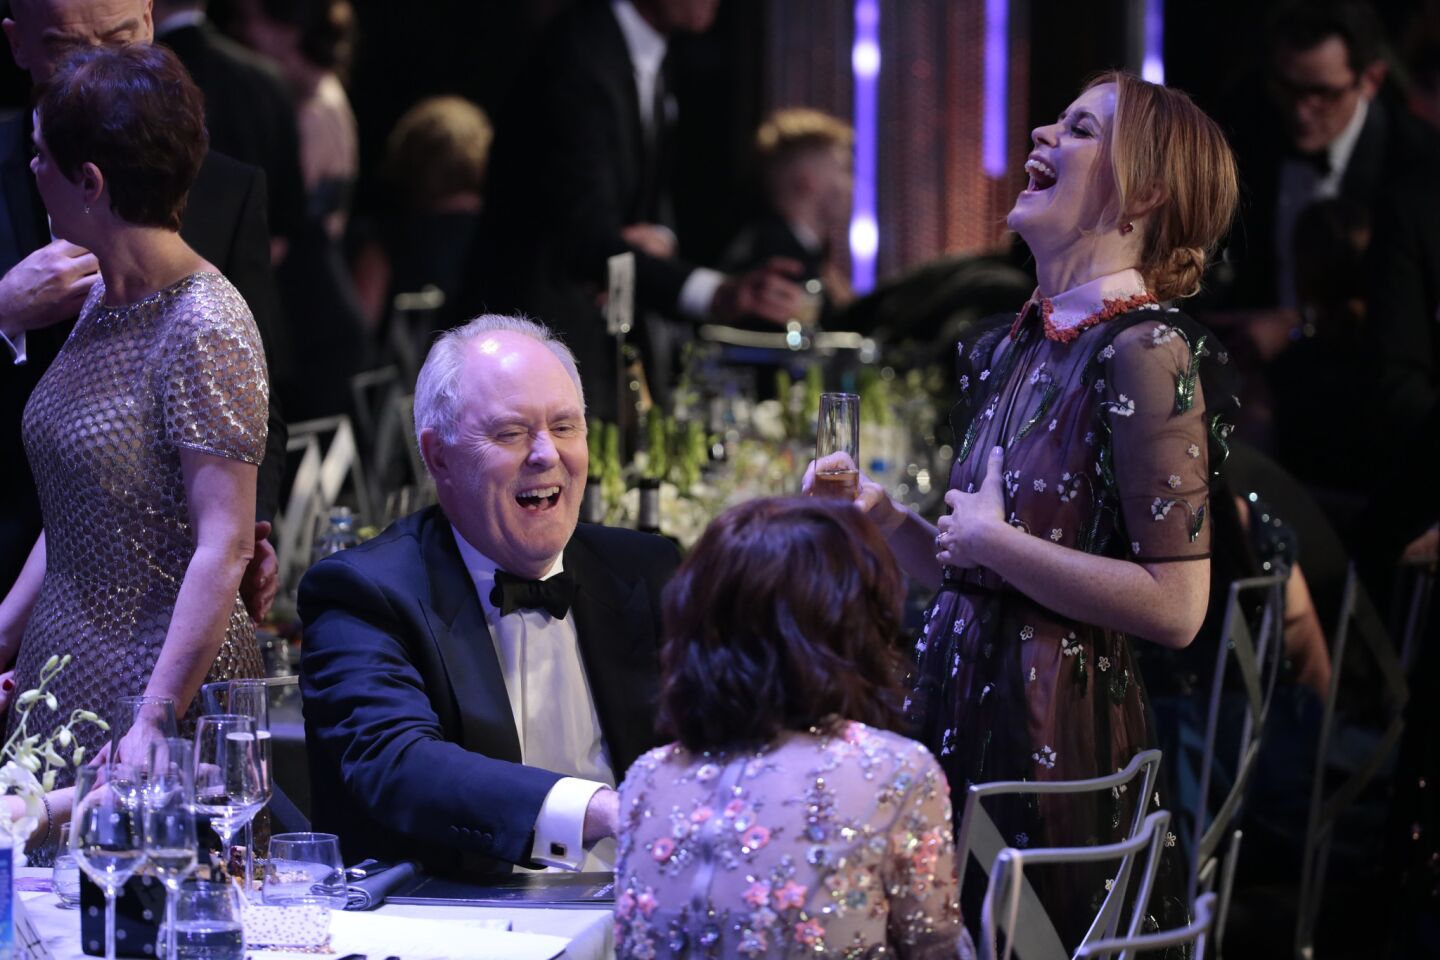 Jon Lithgow shares a laugh with Claire Foy.